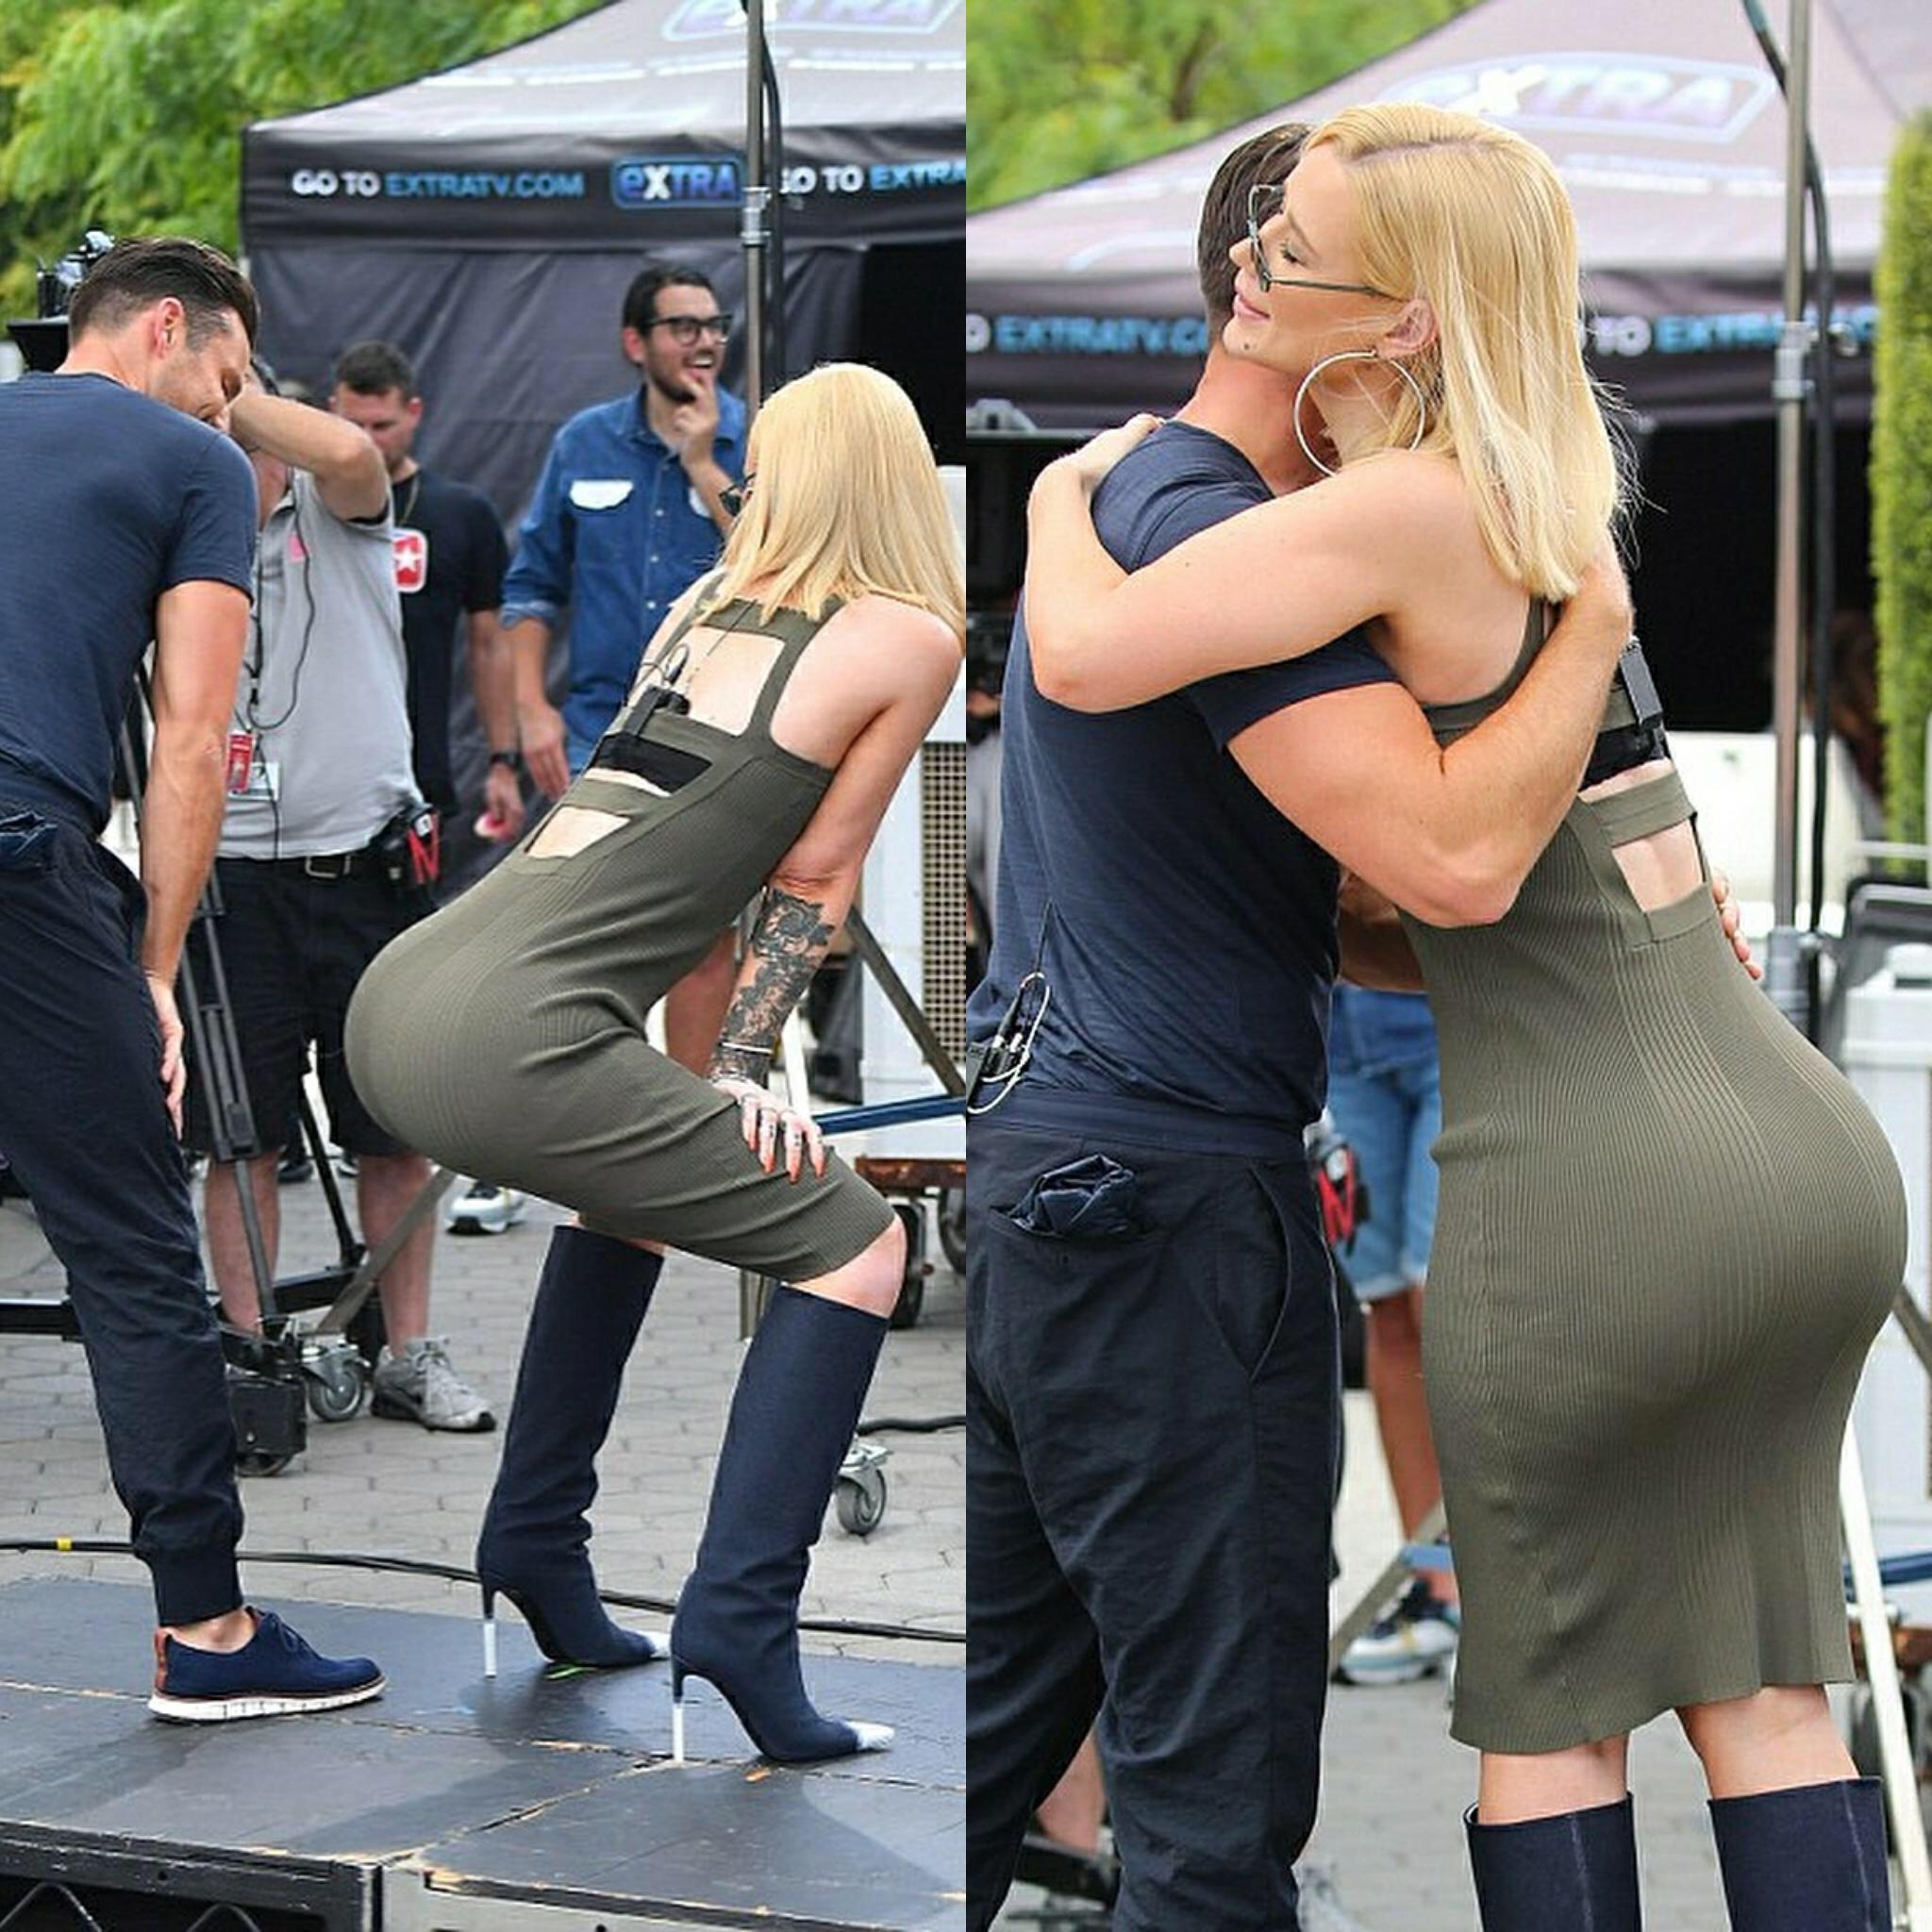 Iggy’s Ass Is The Type That’s So Alluring It Makes U Wanna Grab It When U See It